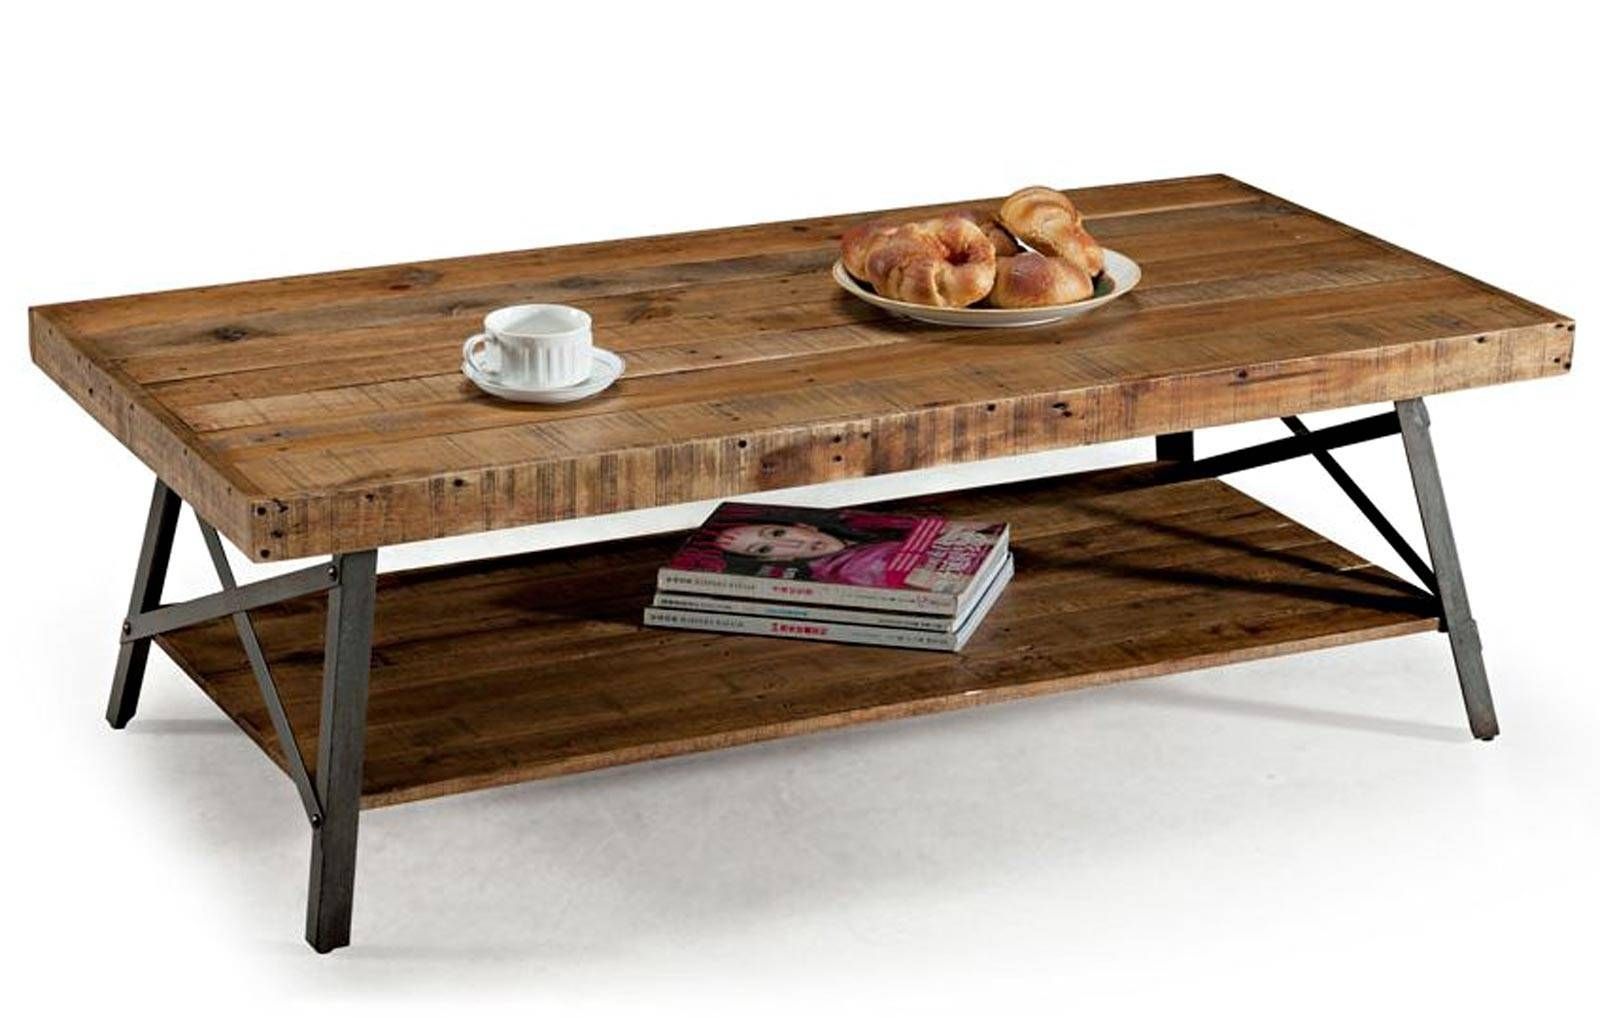 Best Reclaimed Wood Coffee Table 44 For Your Interior Decor Home Pertaining To Reclaimed Wood Coffee Tables (View 11 of 15)